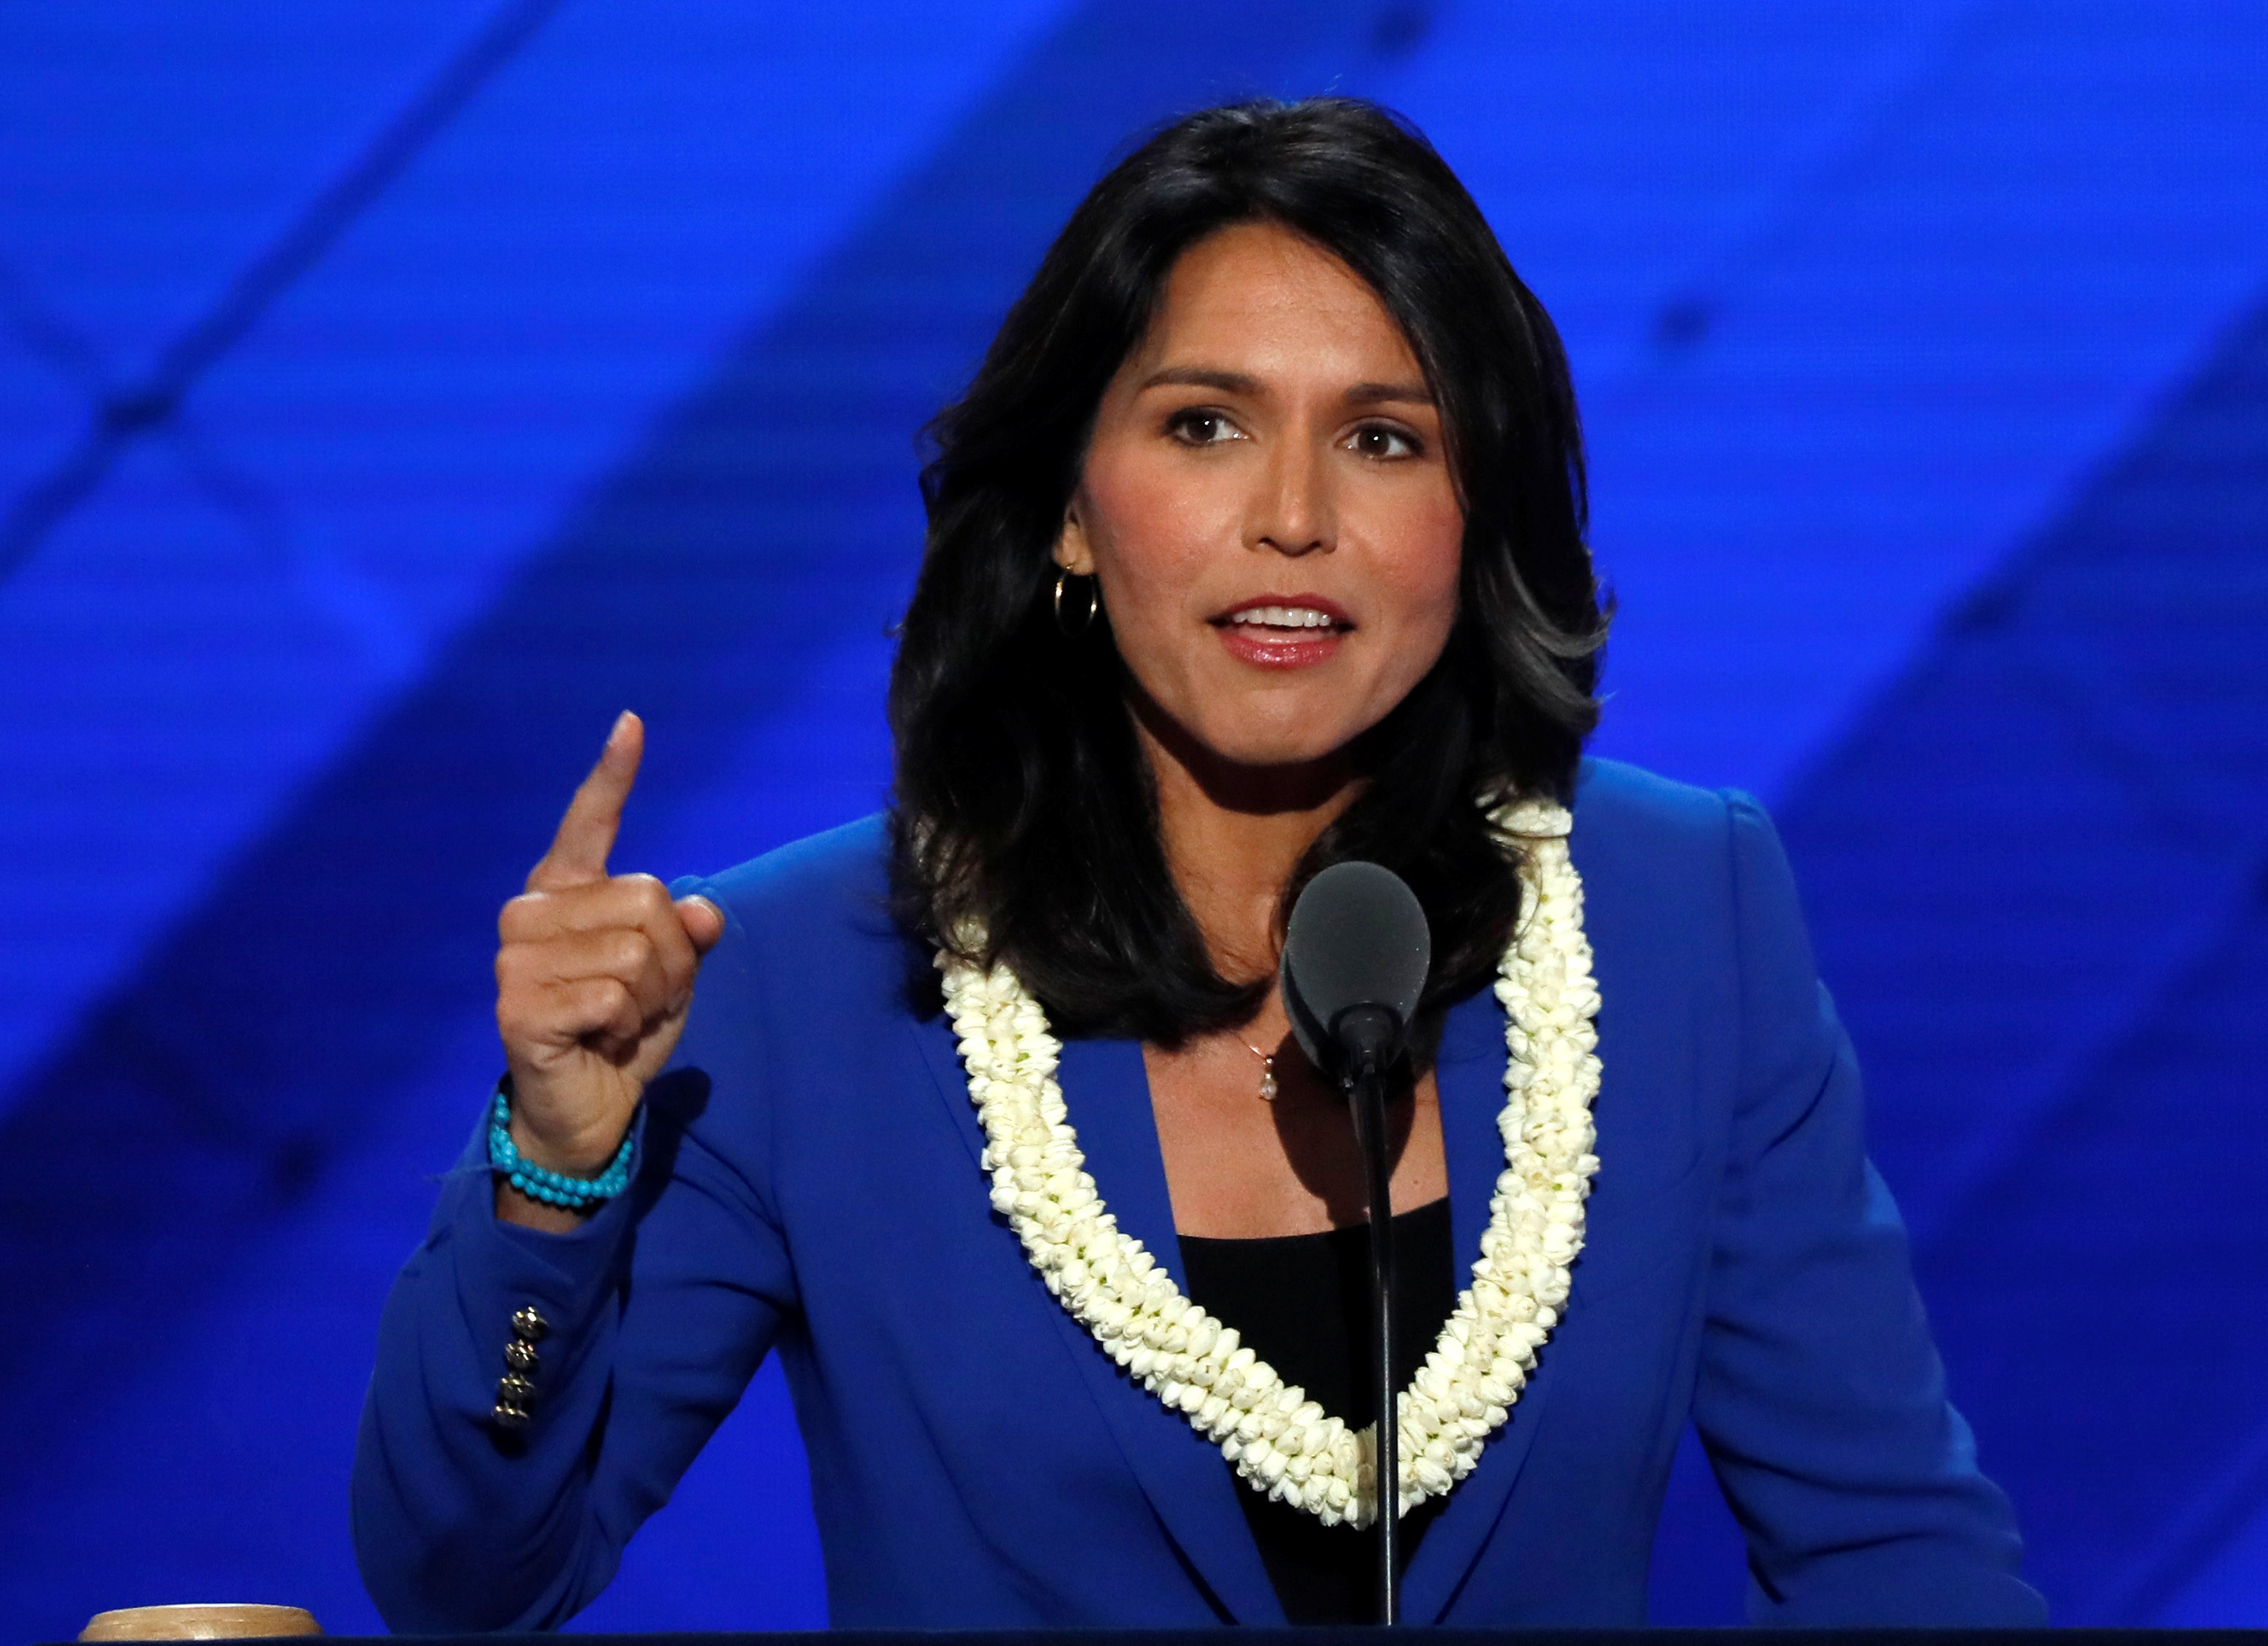 Representative Gabbard delivers a nomination speech for Sanders on the second day at the Democratic National Convention in Philadelphia